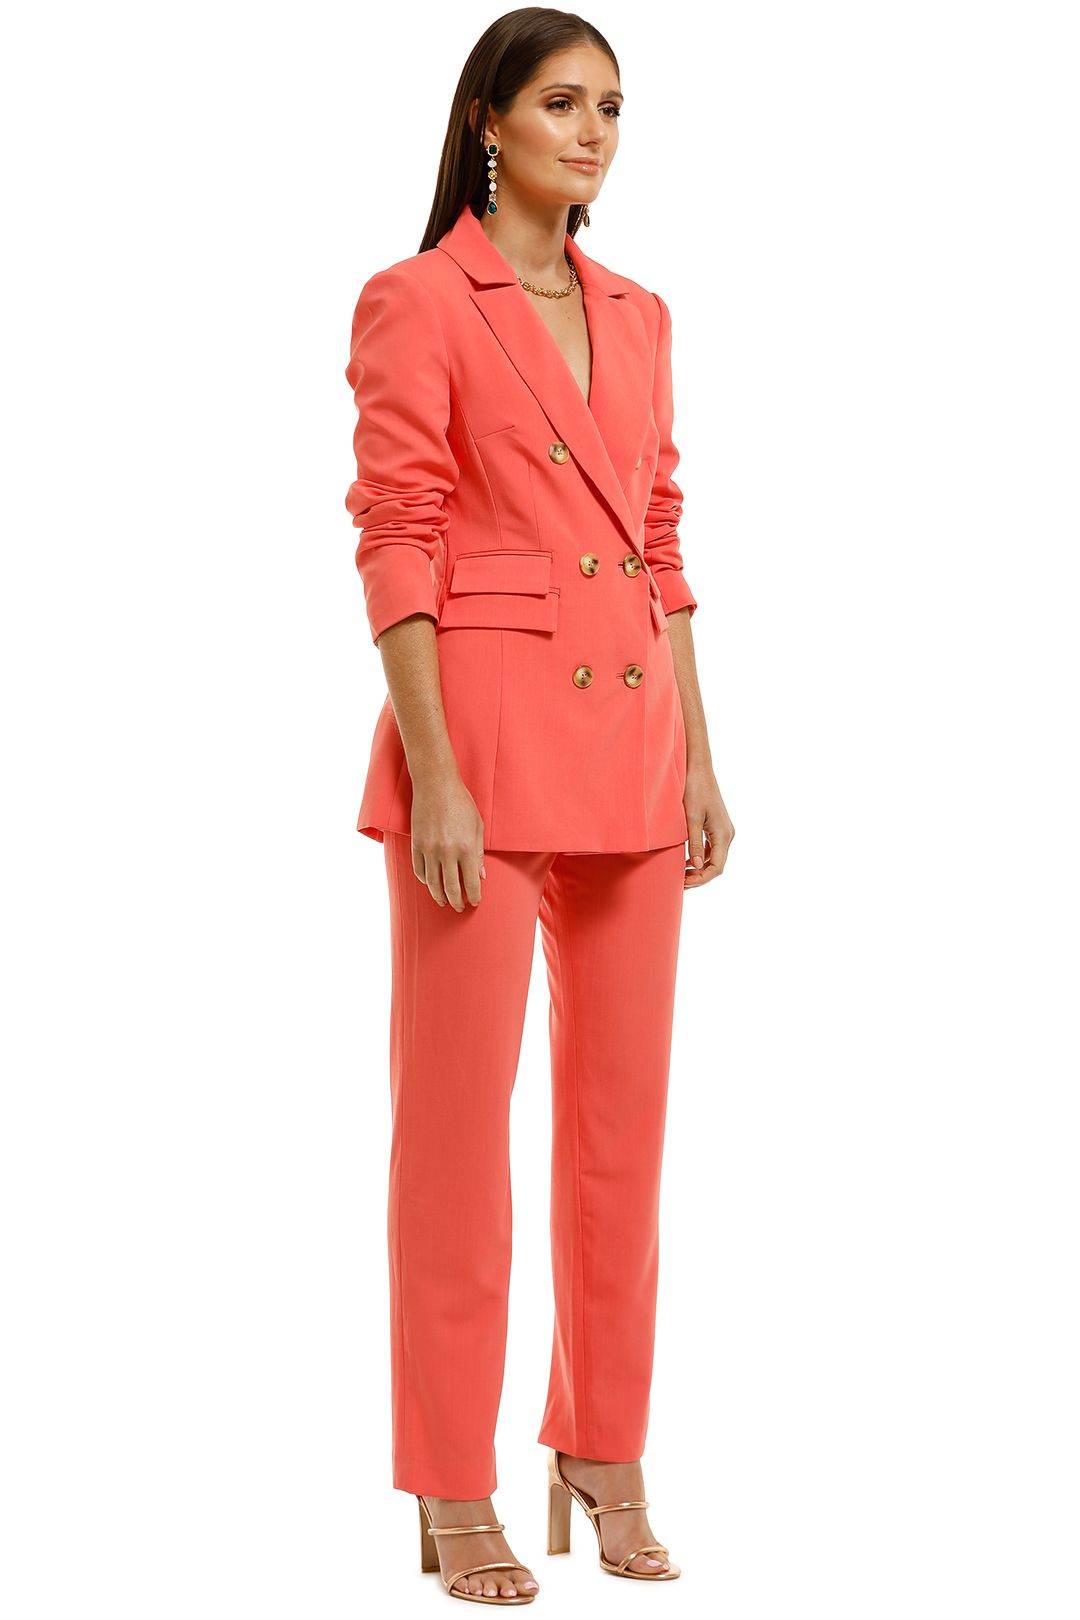 CMEO-Collective-Narrated-Blazer-and-Pant-Set-Watermelon-Side